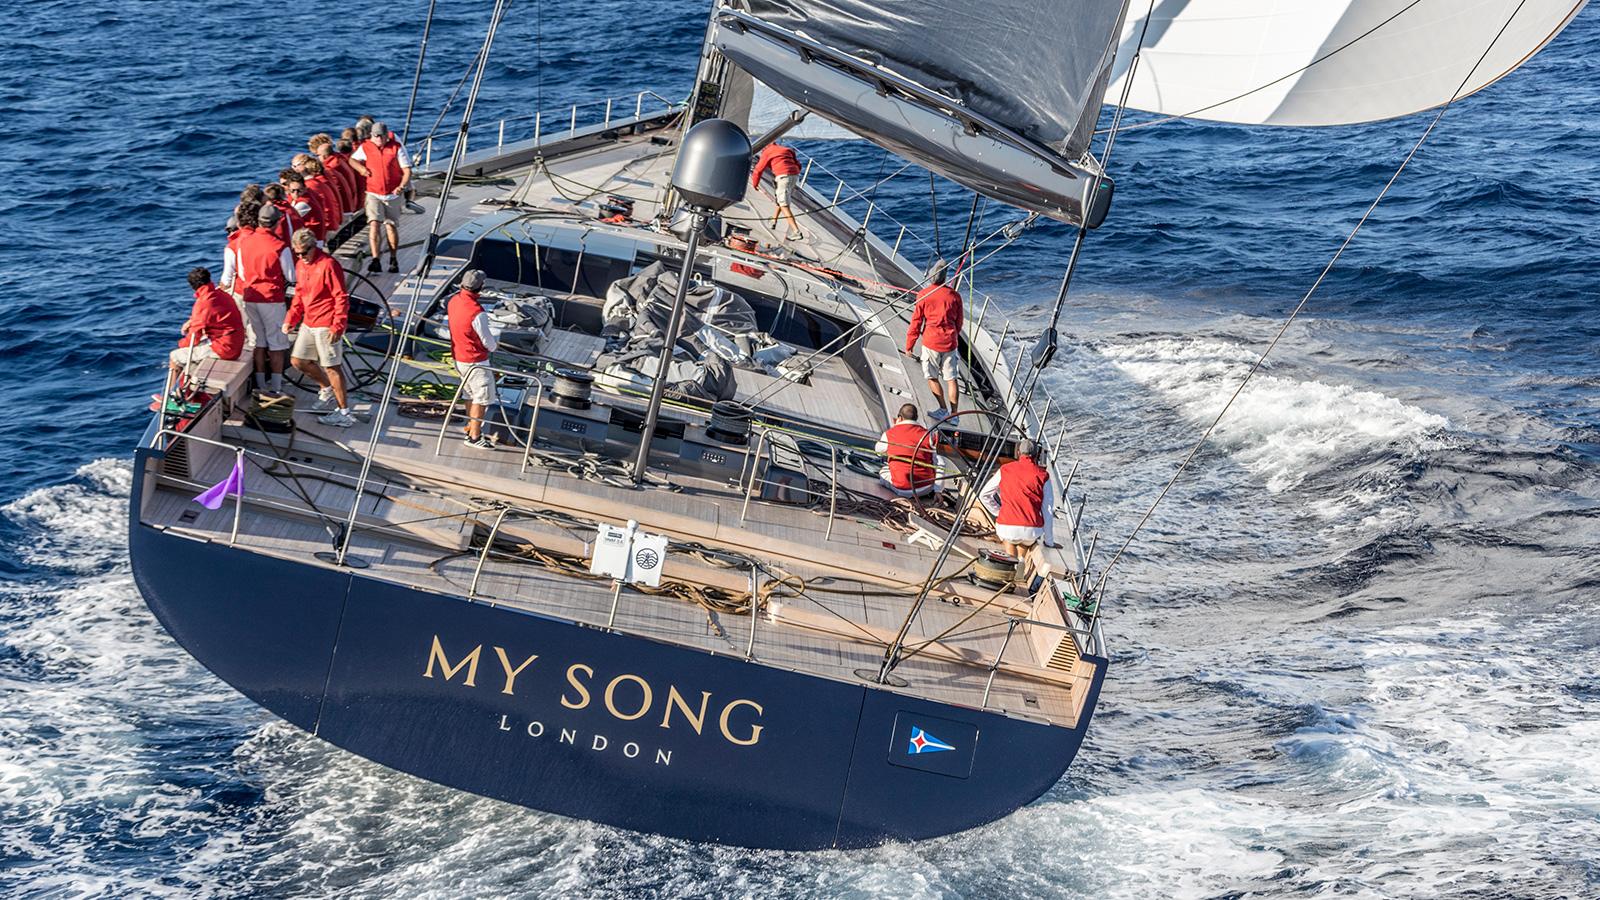 Faraway shot of the My Song luxury yacht.